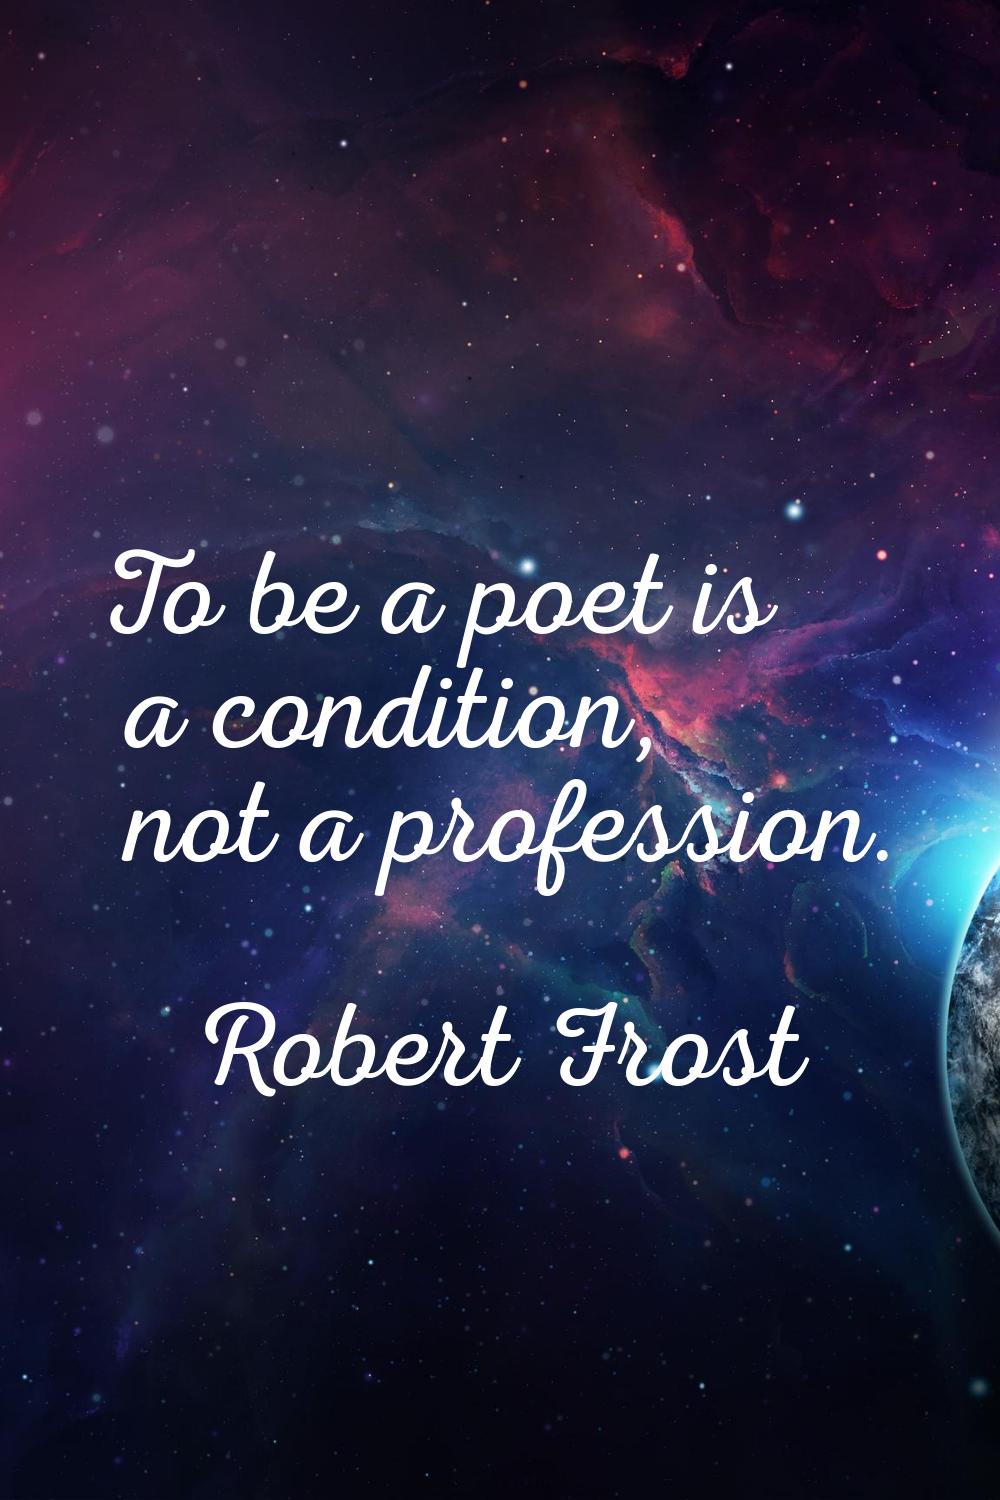 To be a poet is a condition, not a profession.